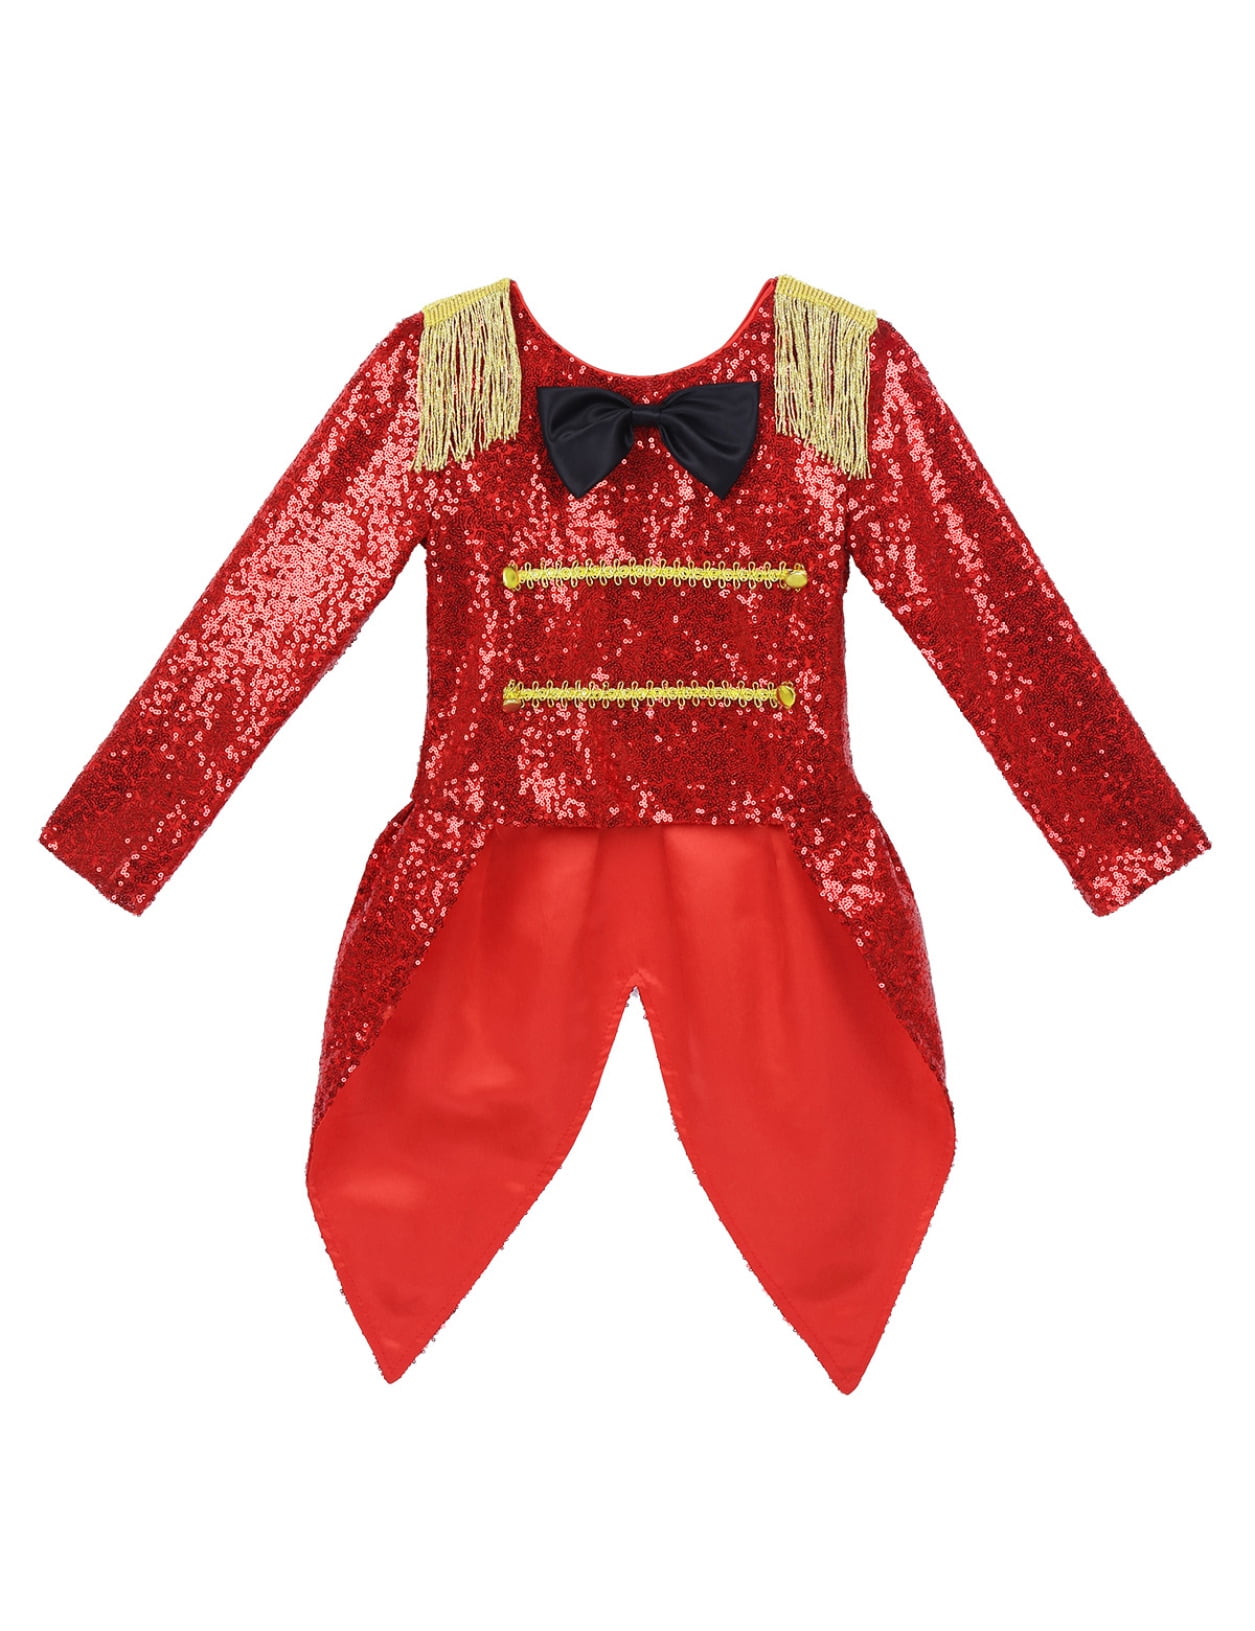 iEFiEL Toddler Baby Girls Show Costume Romper Halloween Ringmaster Circus Cosplay Christmas Birthday Party Outfit 